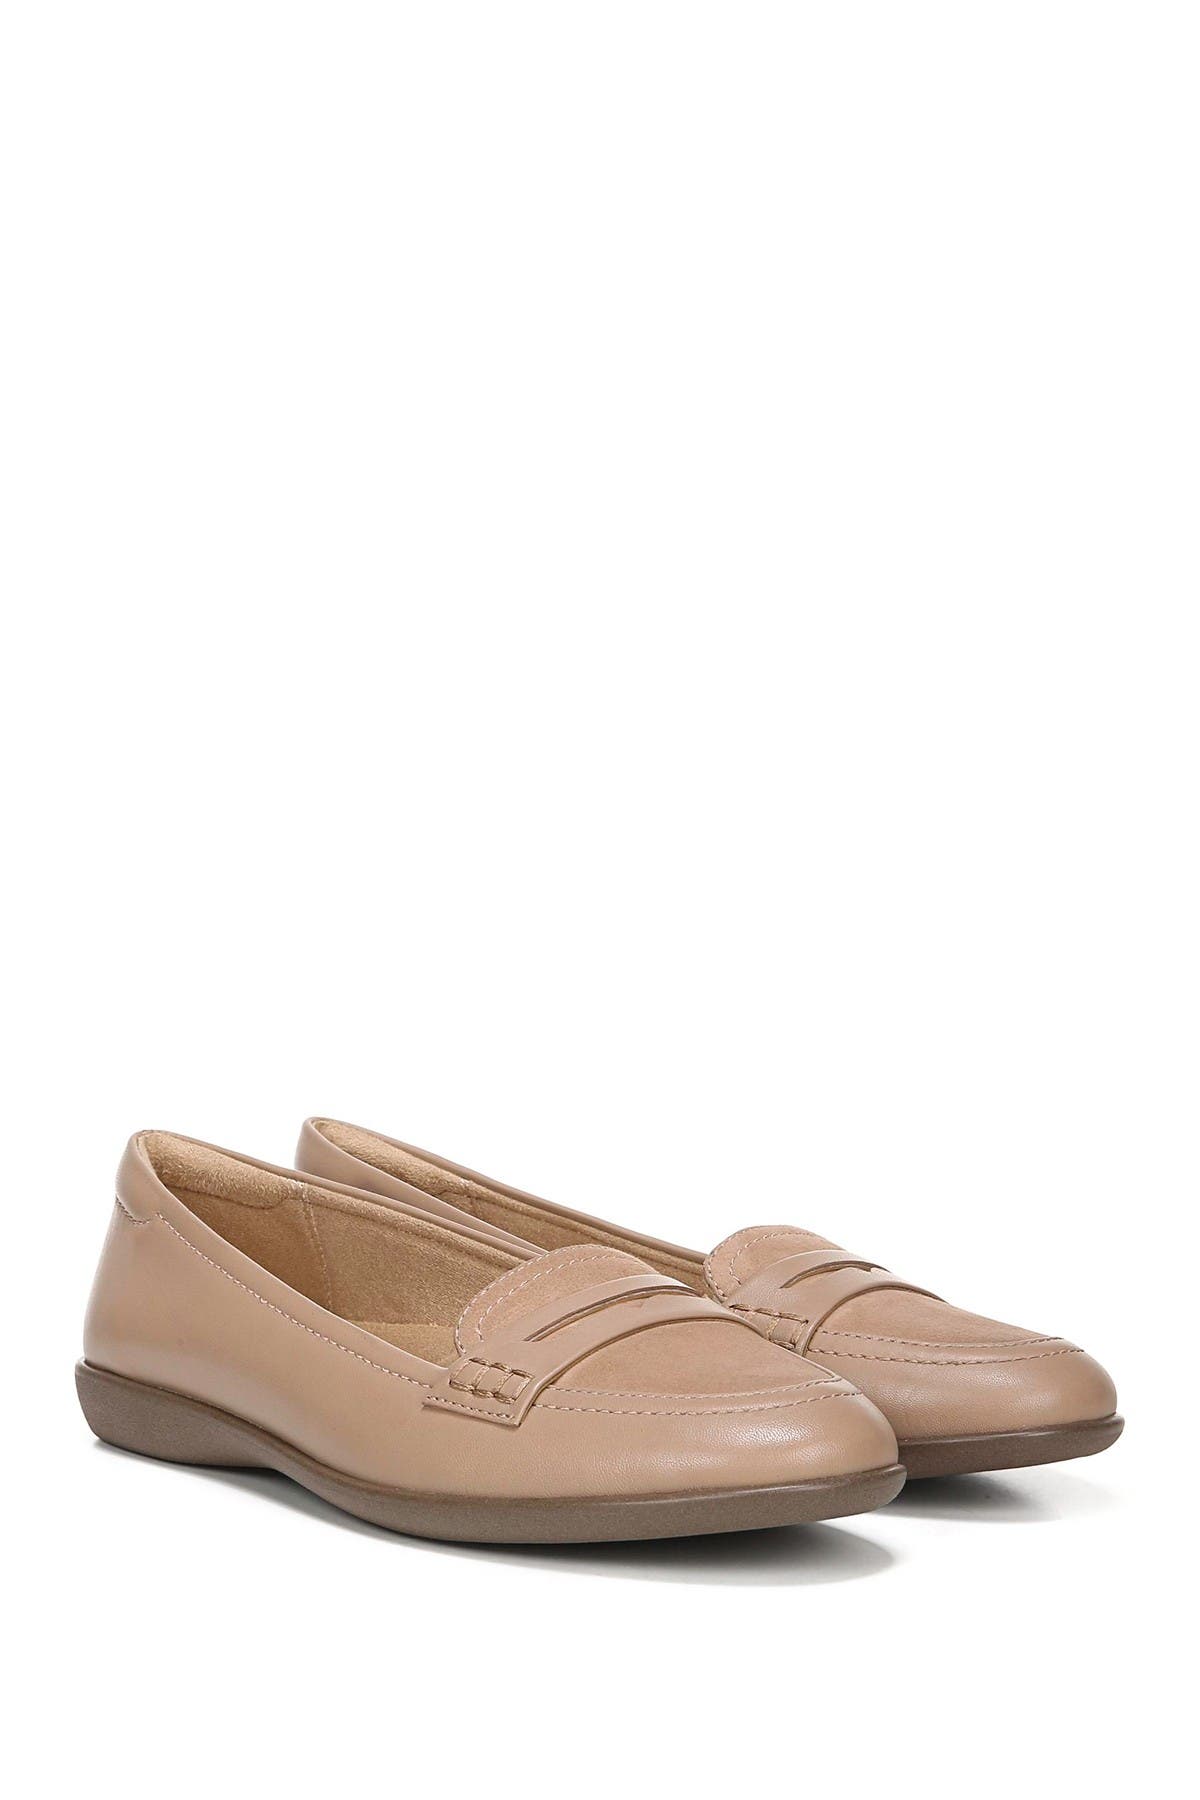 naturalizer penny loafers